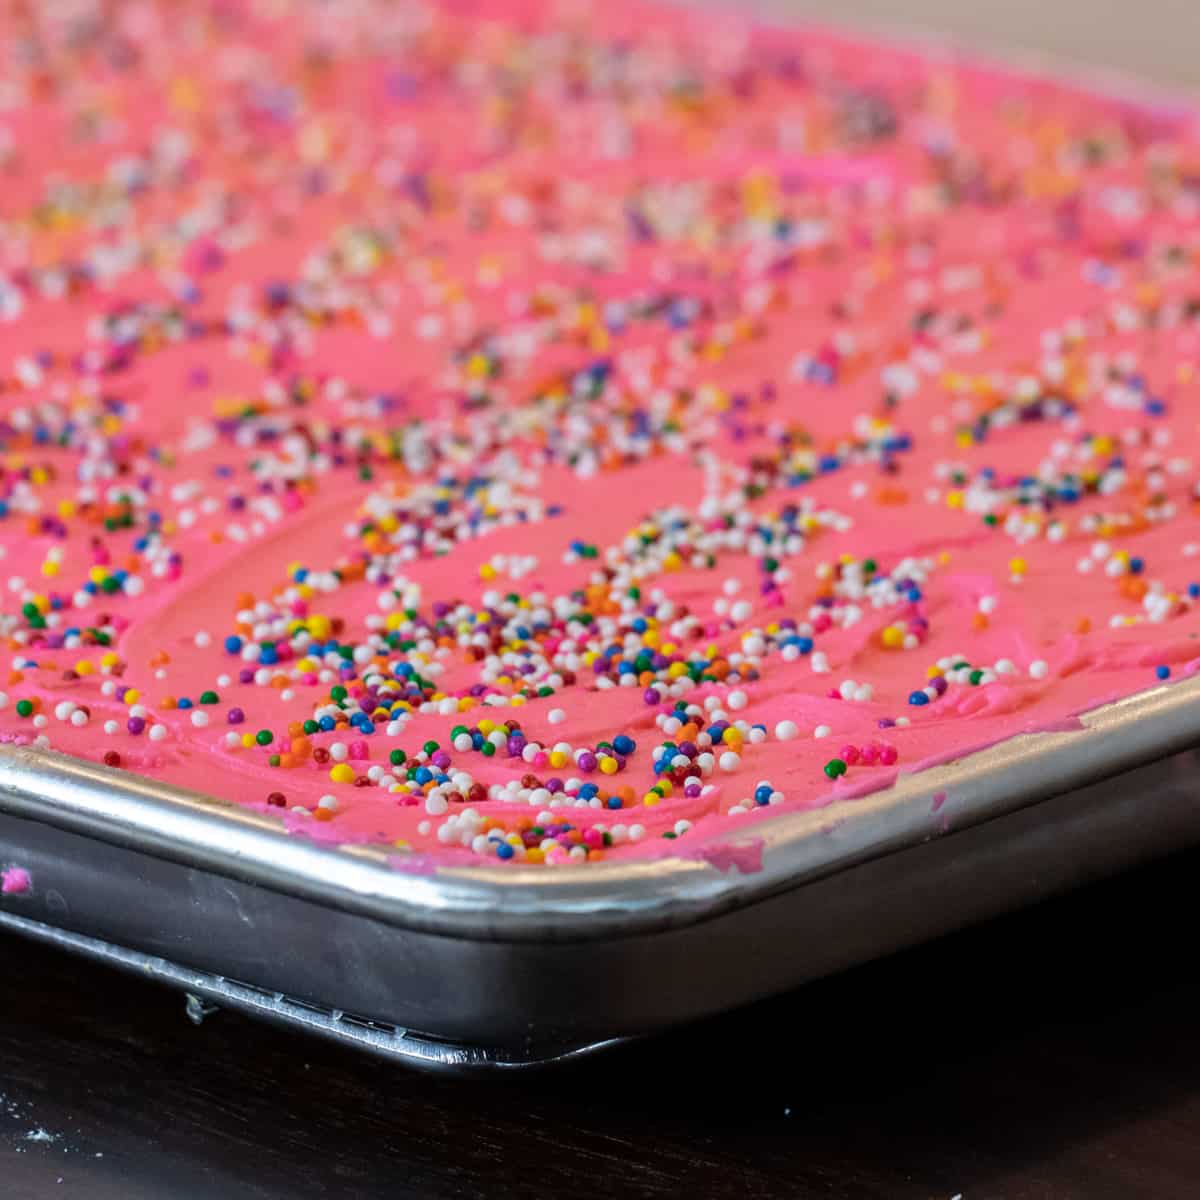 Cake frosted with pink icing with sprinkles all over the cake.